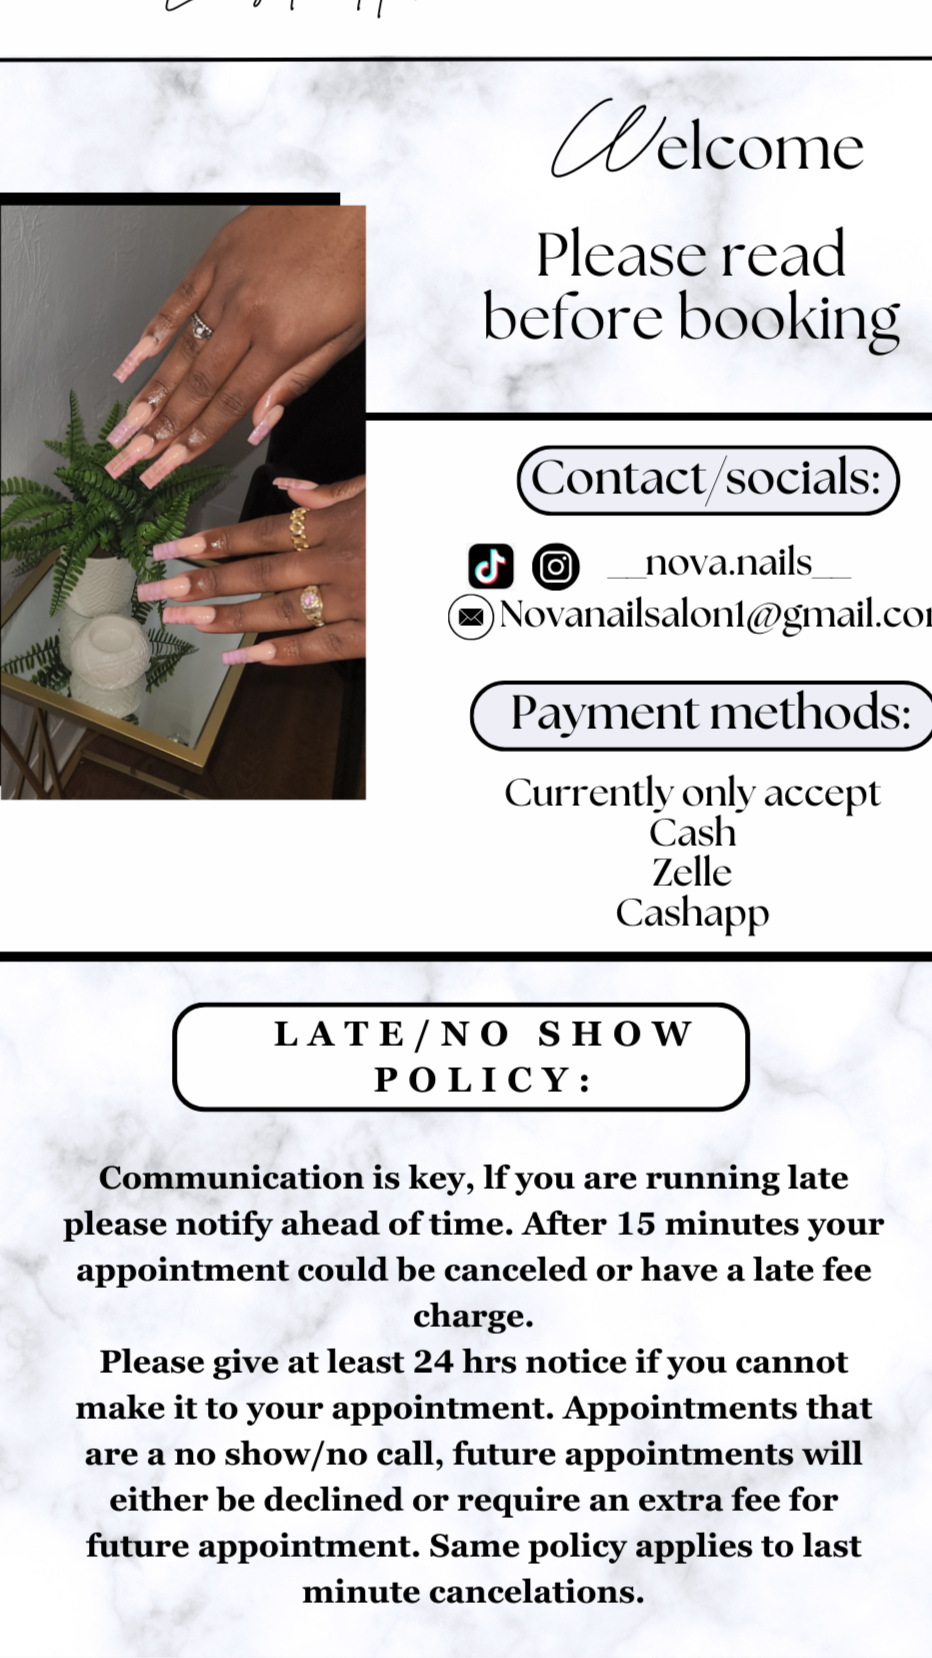 12 Effective Salon Cancellation Policy Templates and Examples | zolmi.com